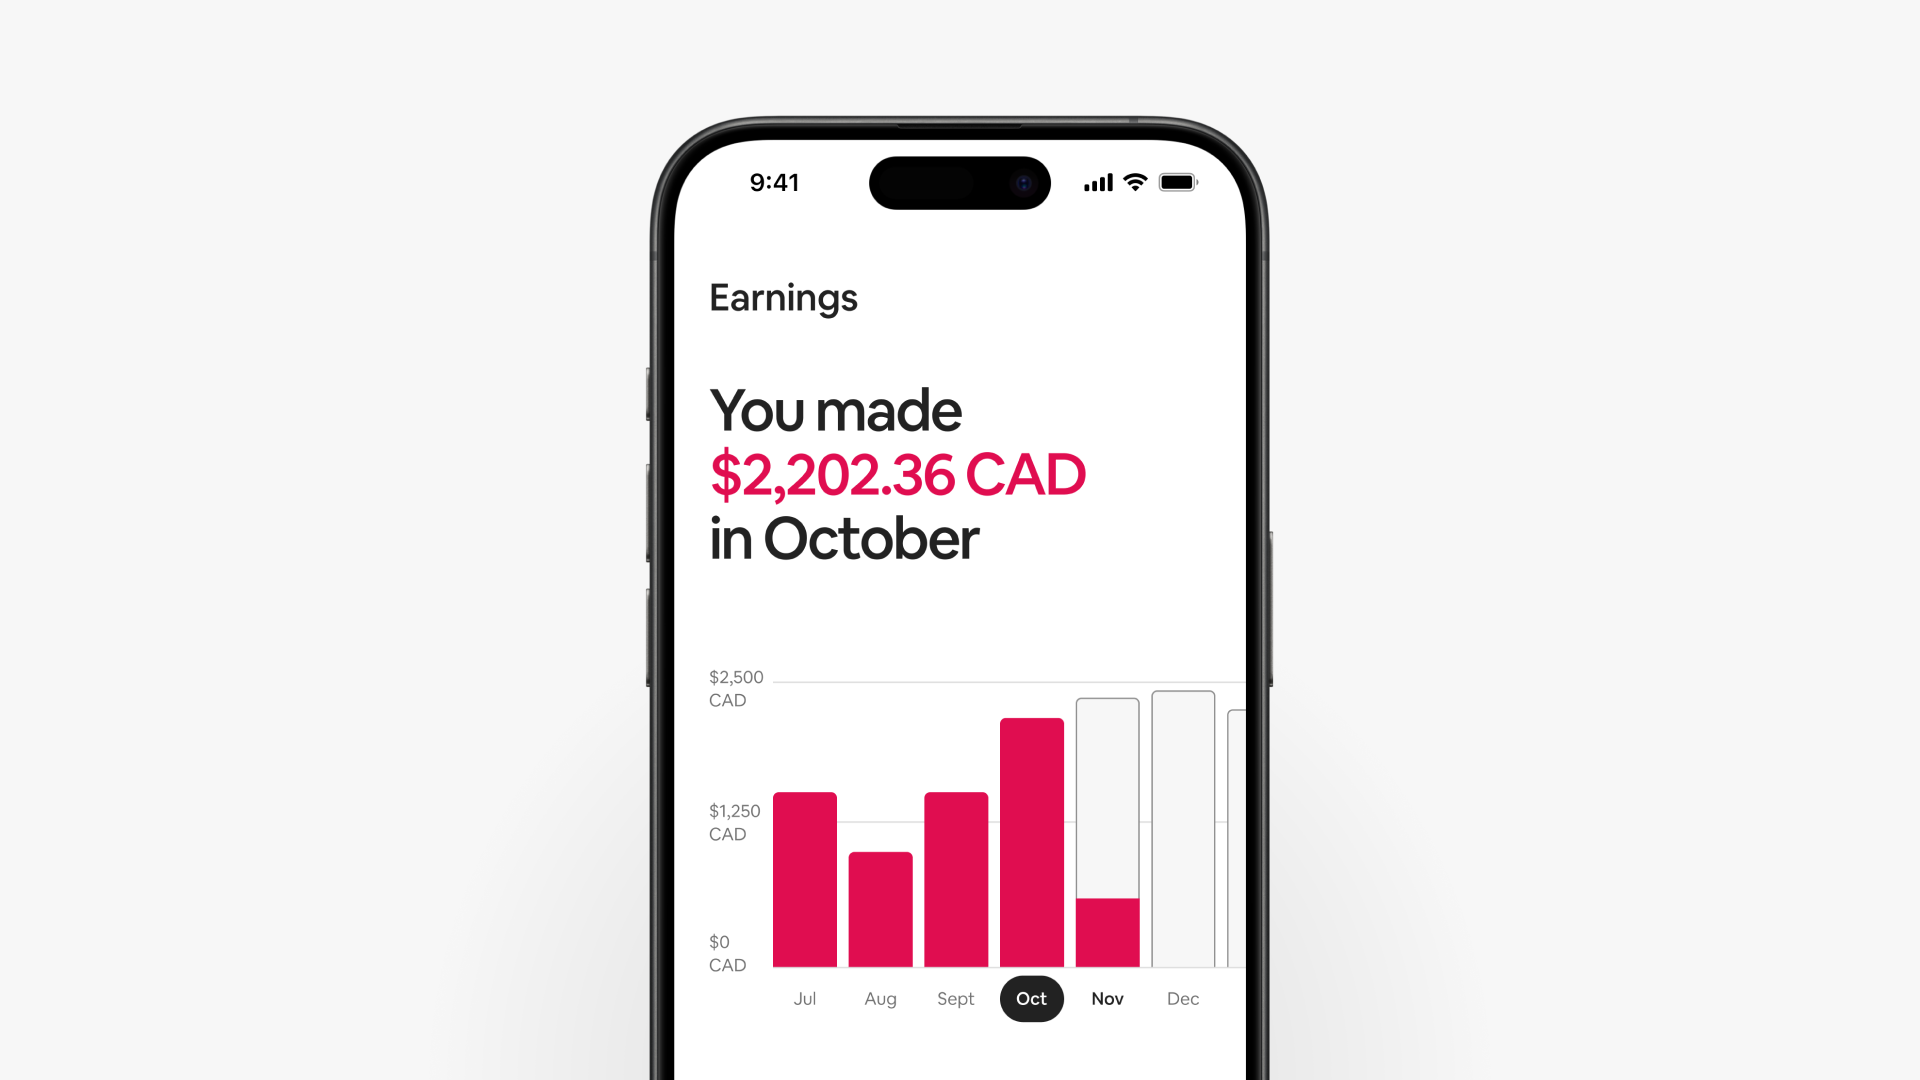 A phone screen shows how Airbnb Hosts can filter payouts by date, including custom date ranges, in the earnings dashboard.